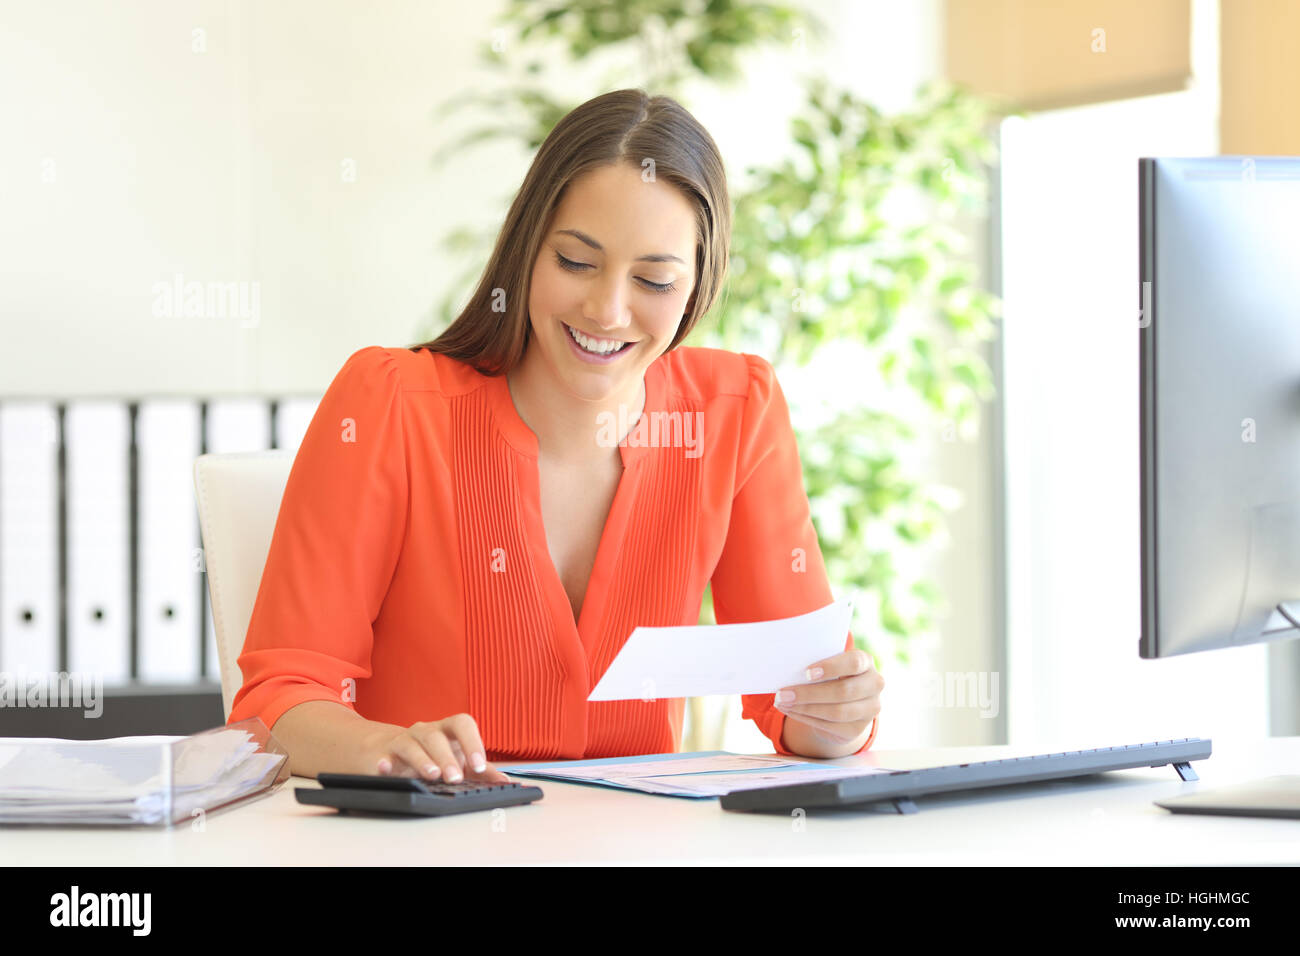 Businesswoman wearing orange blouse doing accounting and calculating with a calculator in a desktop at office Stock Photo